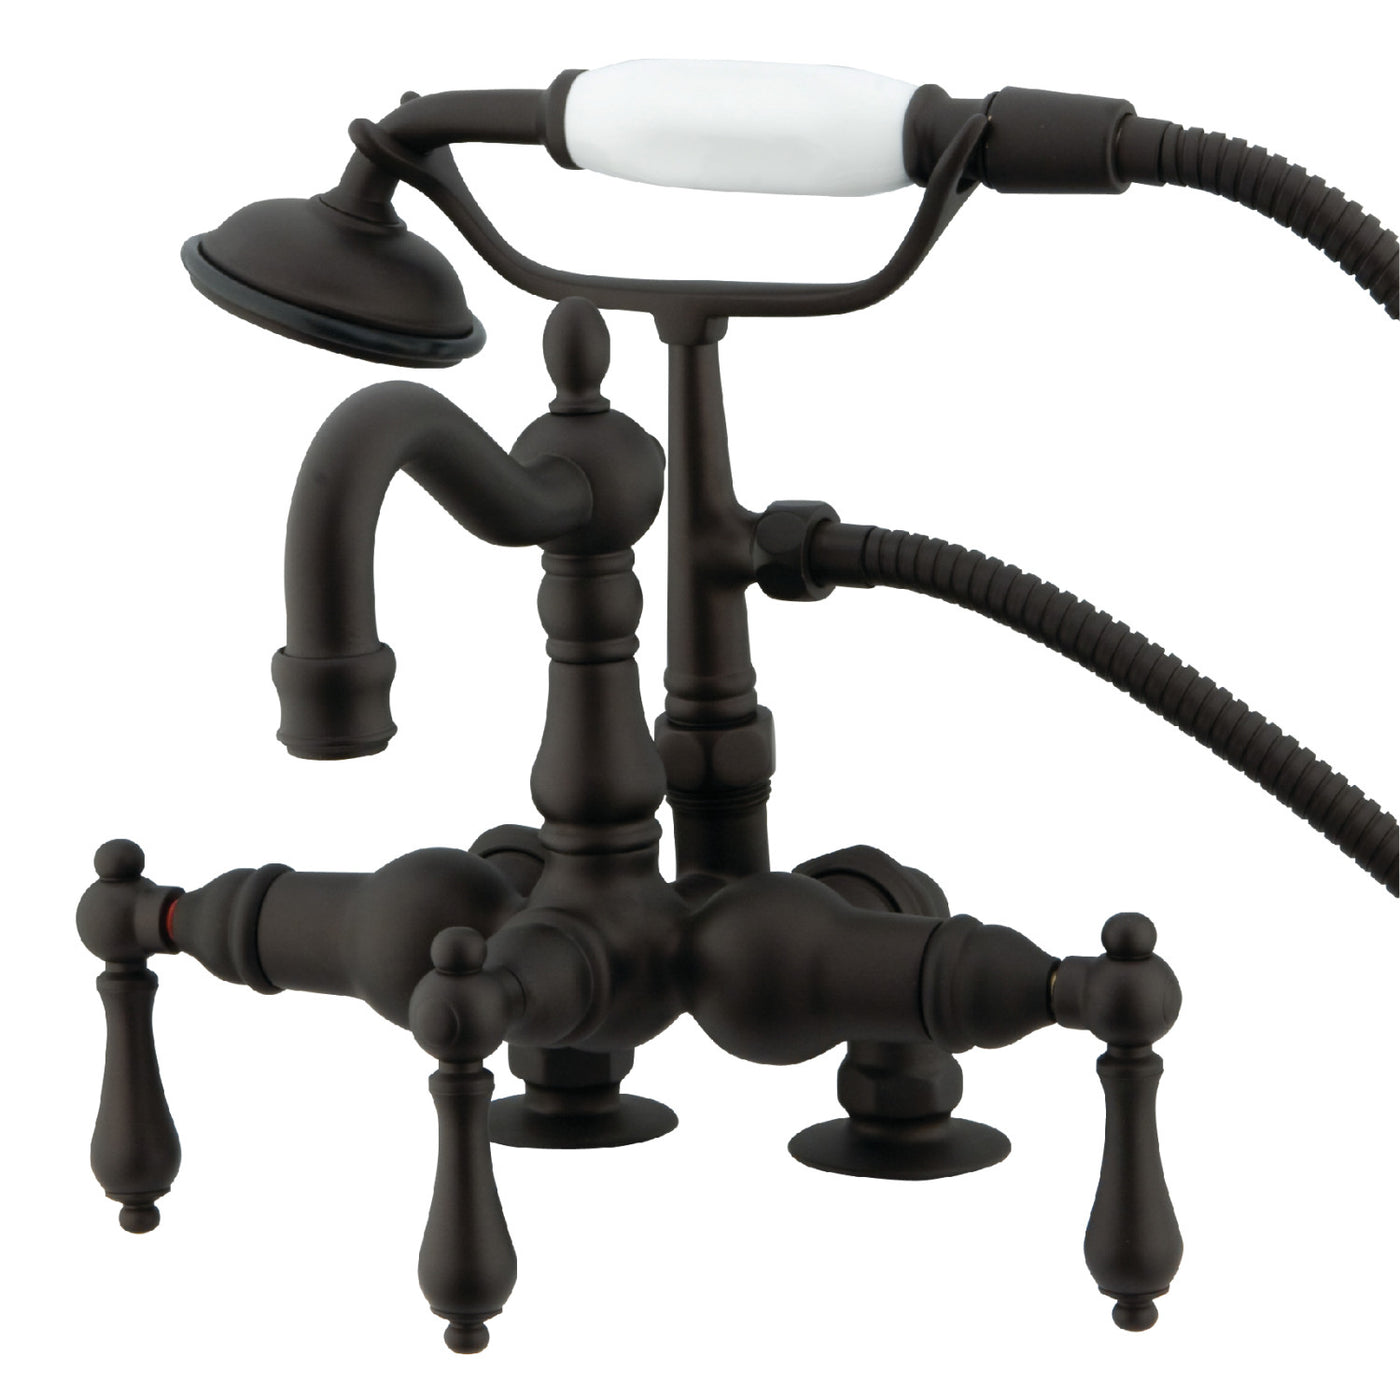 Elements of Design DT10135AL 3-3/8-Inch Deck Mount Clawfoot Tub Faucet with Hand Shower, Oil Rubbed Bronze